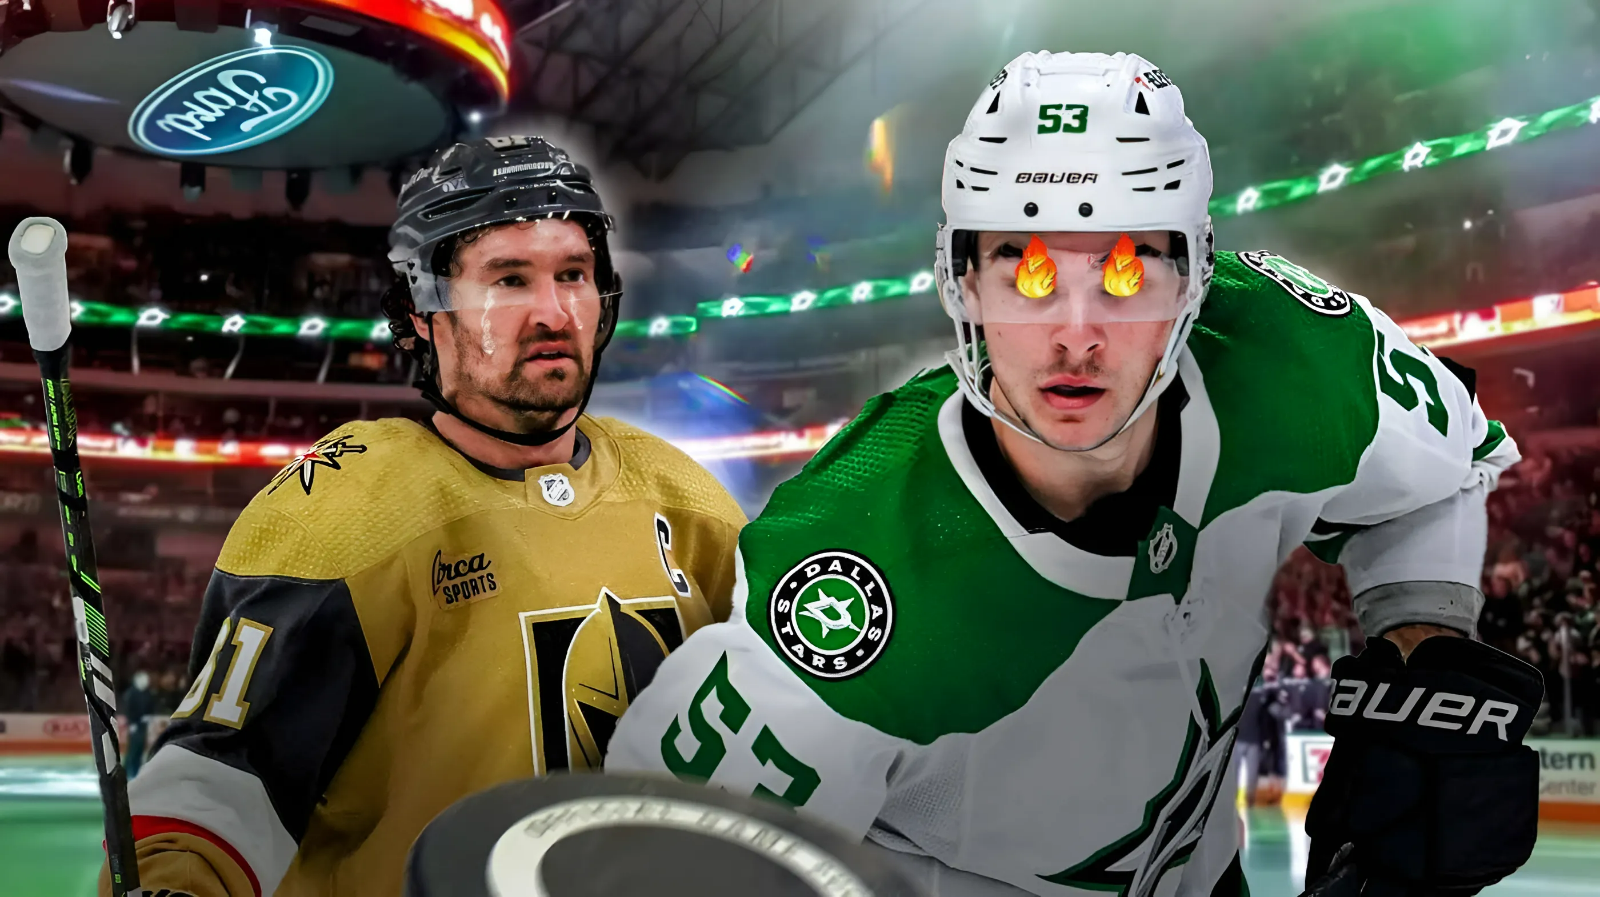 Stars send fans into frenzy after Game 7 win over Golden Knights